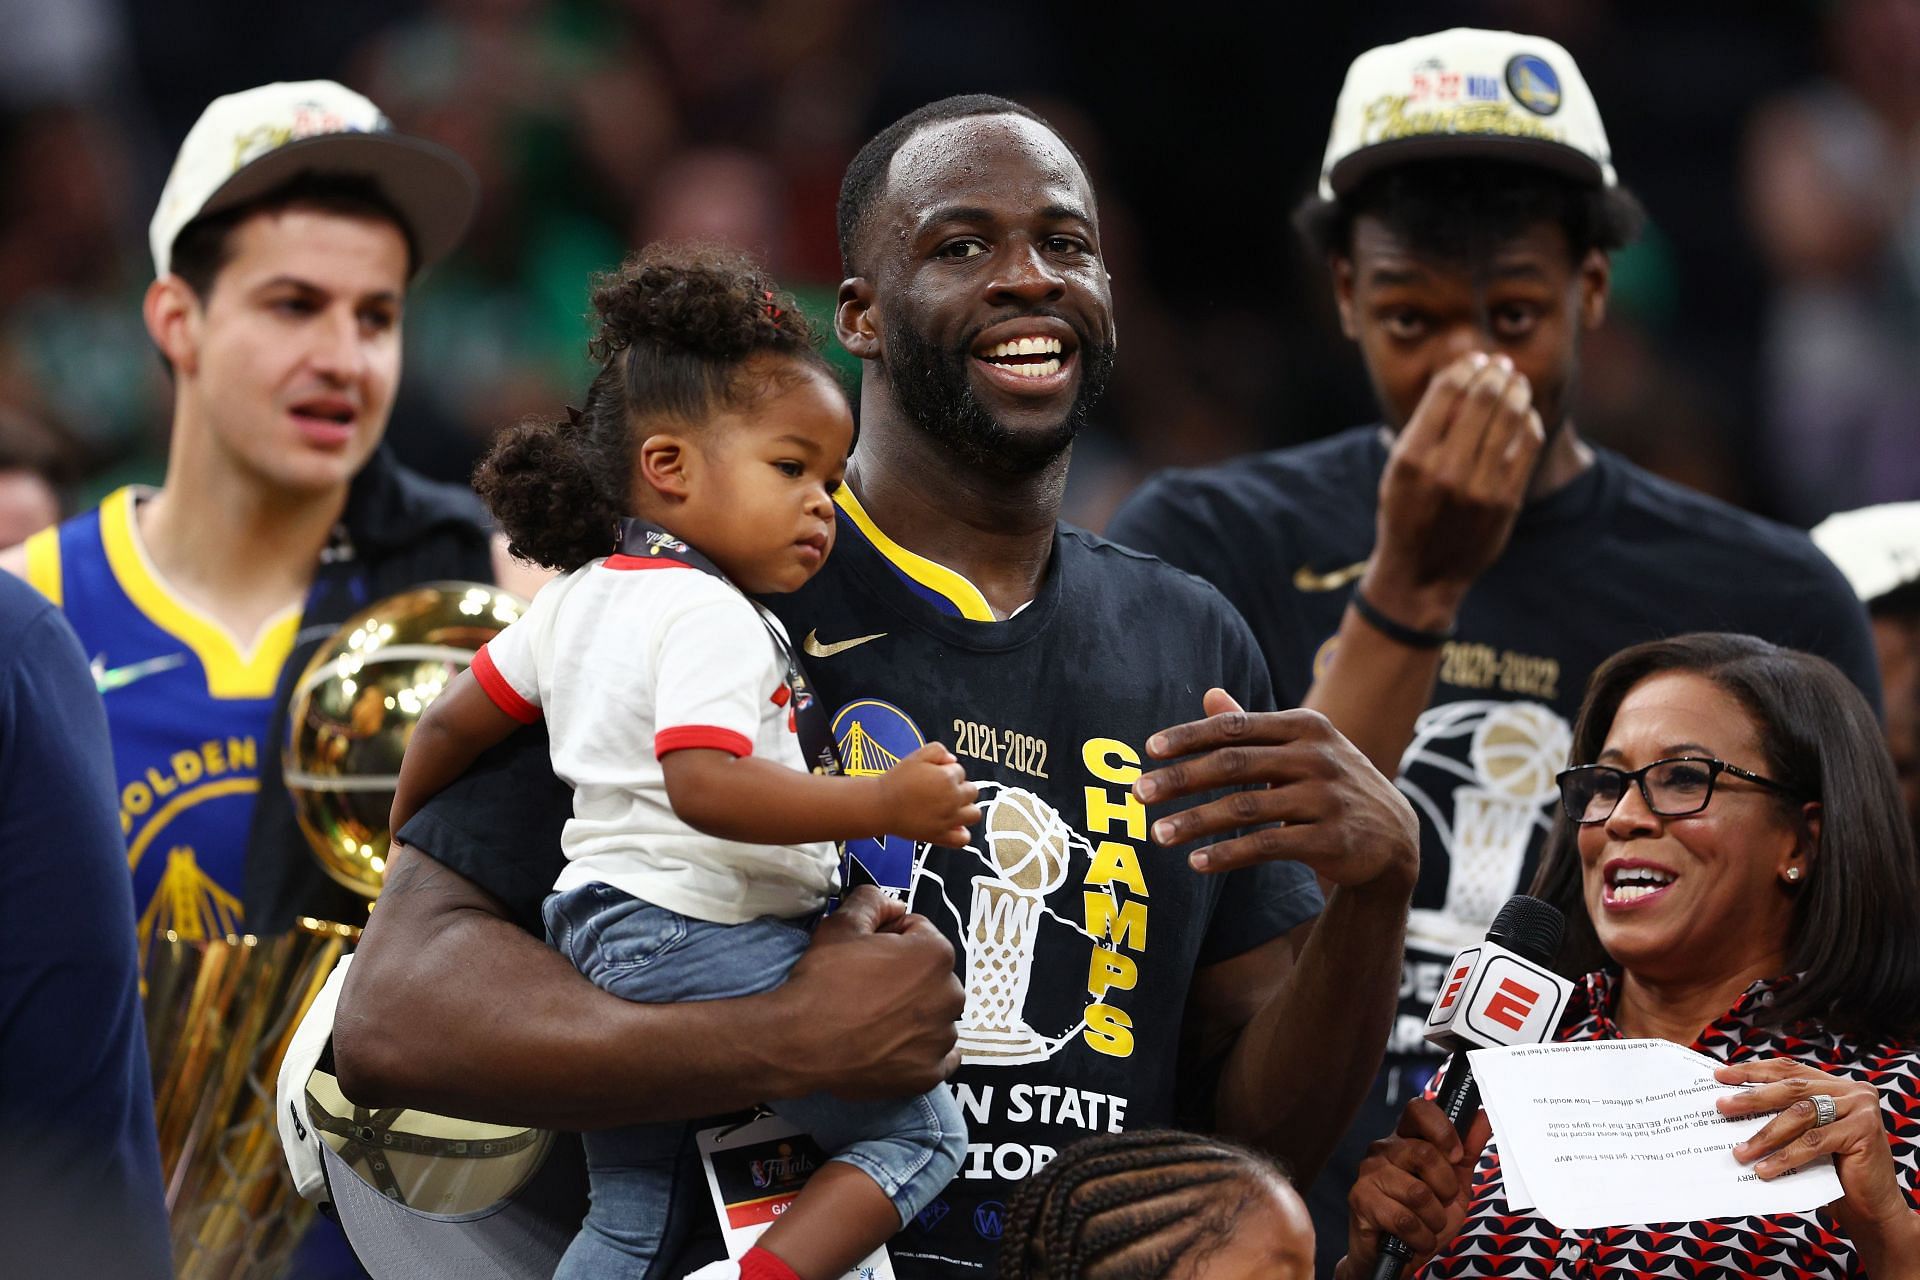 Sorry haters: MSU's Draymond Green now a 3-time NBA champ - The Only Colors